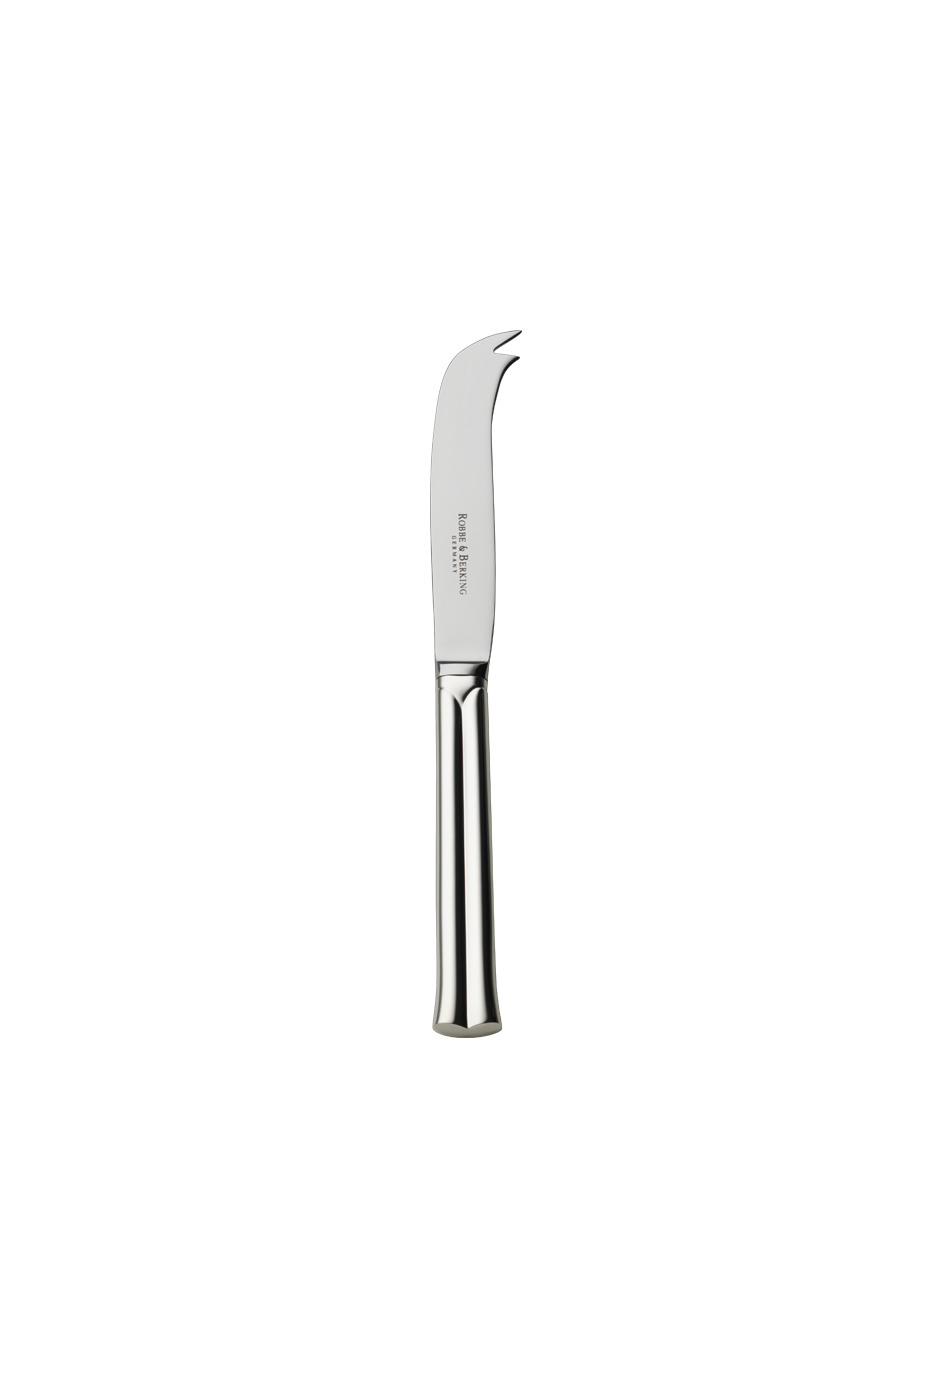 Viva Cheese Knife (925 Sterling Silver)